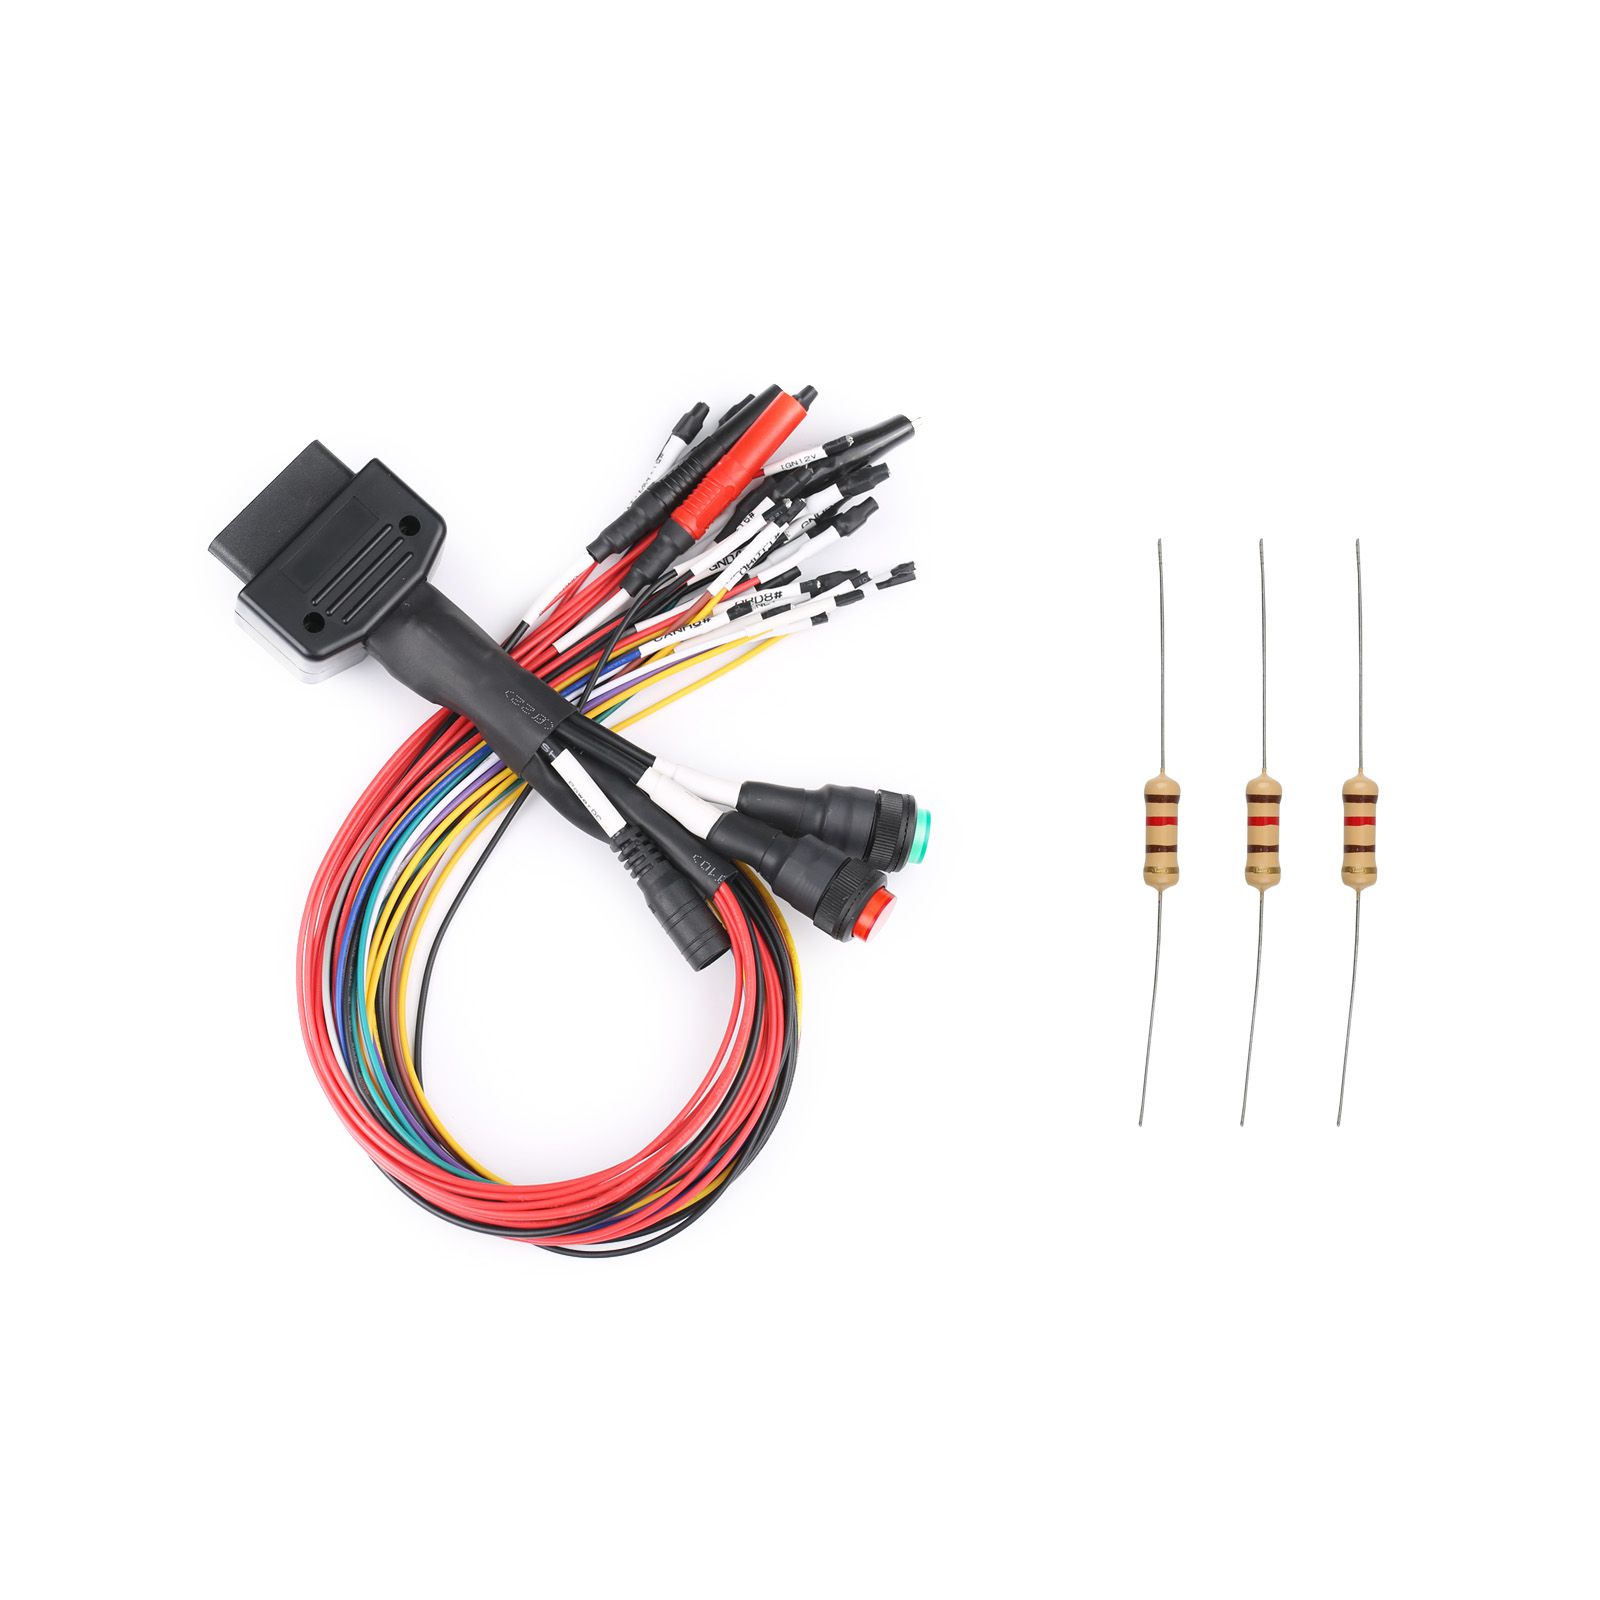 2022 Newest Breakout Tricore Cable GODIAG Full Protocol OBD2 Jumper Cable for MPPS Kess V2 Fgtech Byshut DisProg Bench Work